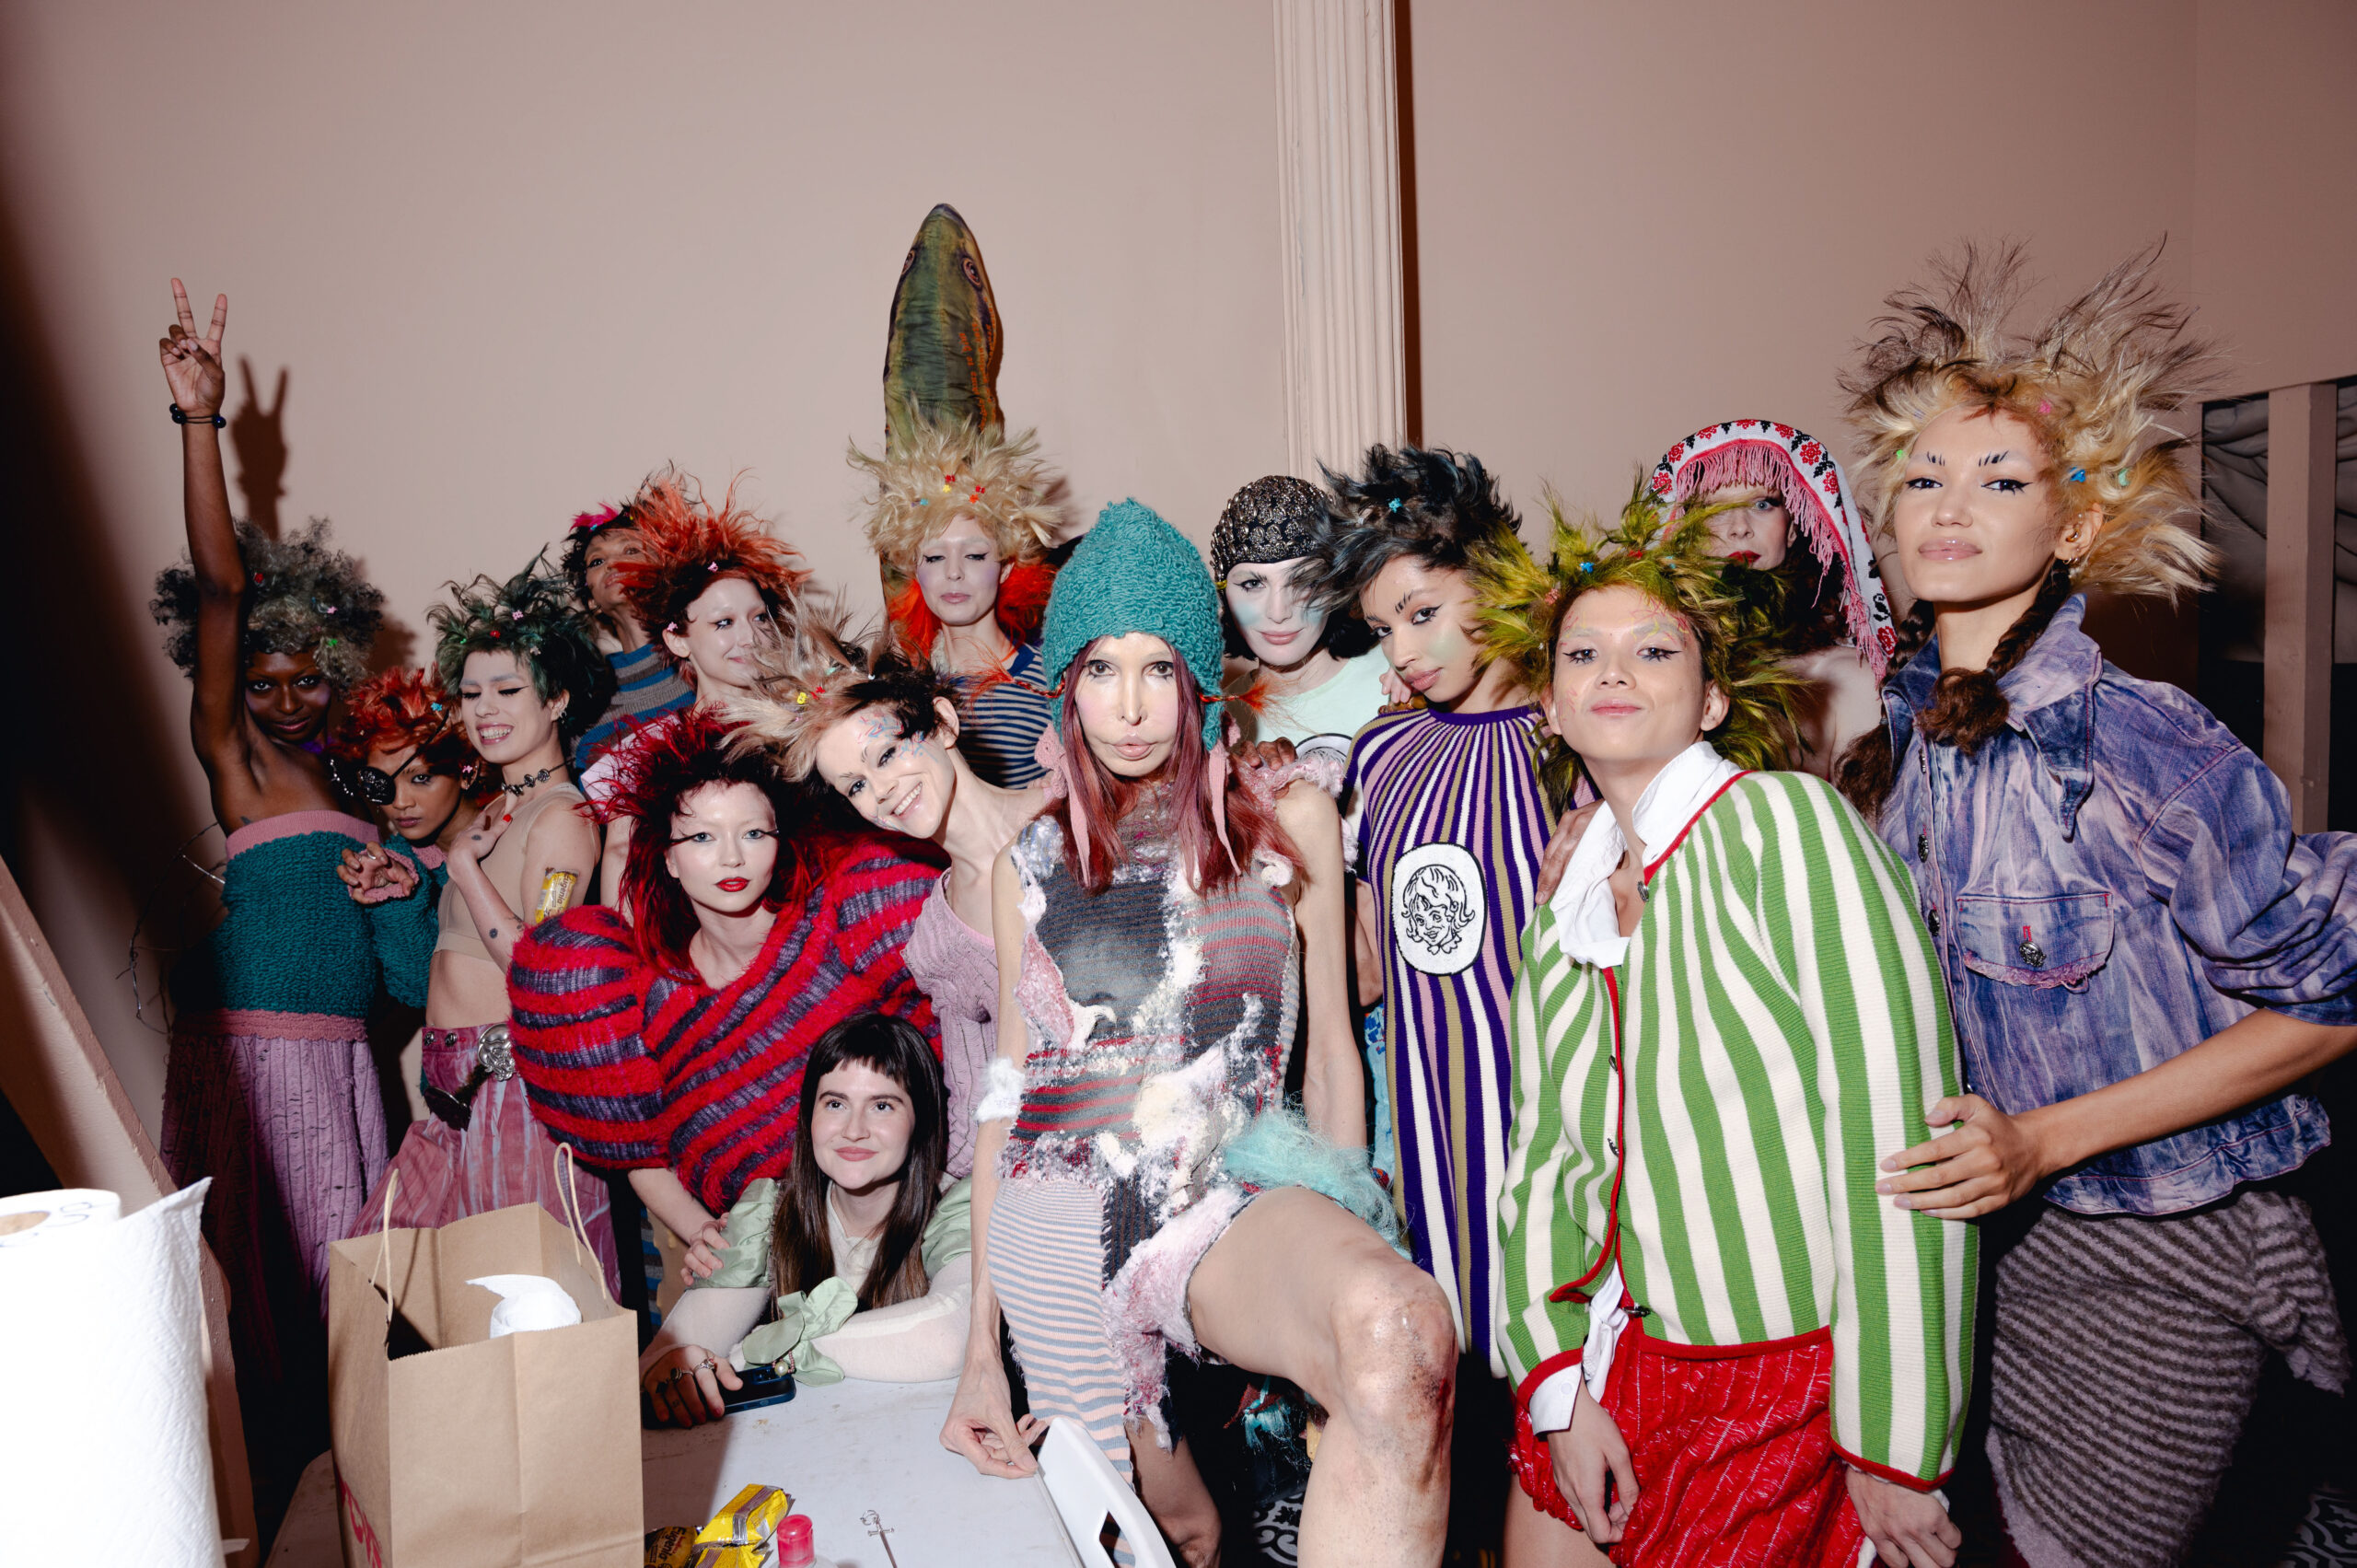 A group of models pose backstage at Pipenco's Ready-to-Wear show, each showcasing a unique, whimsical outfit from the collection that embodies the spirit of playful and chaotic childhood themes.